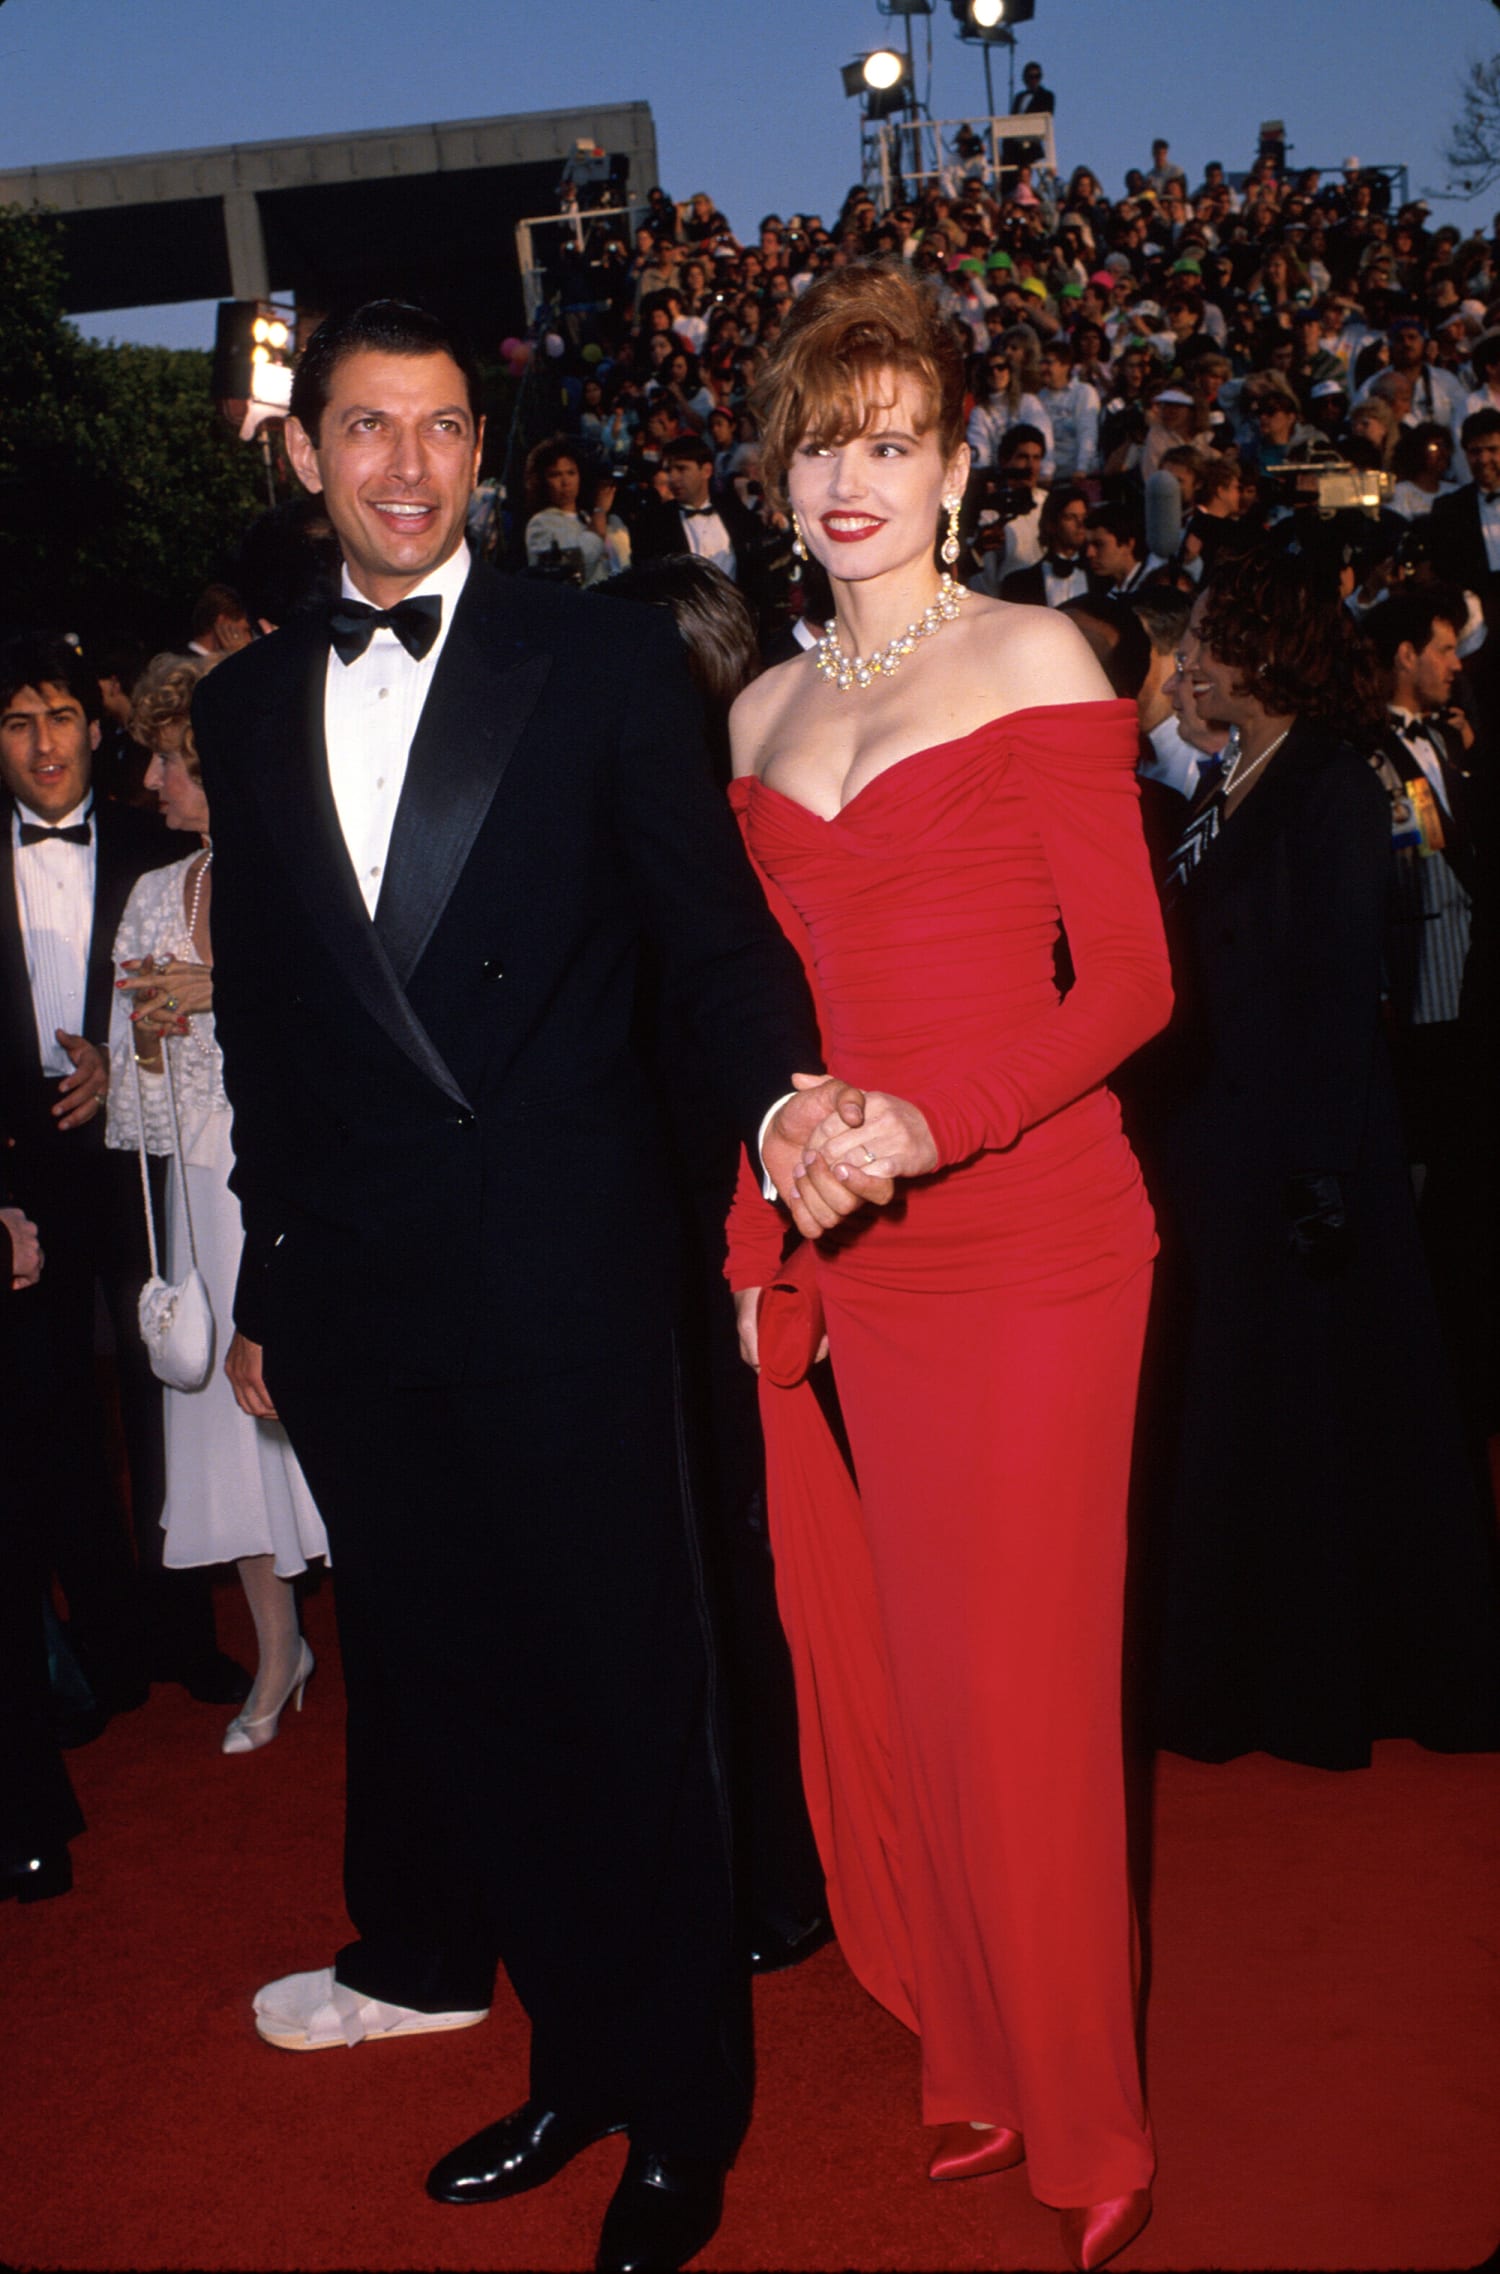 How Oscars Red Carpet Style From 1990s, 2000s Influence Today's